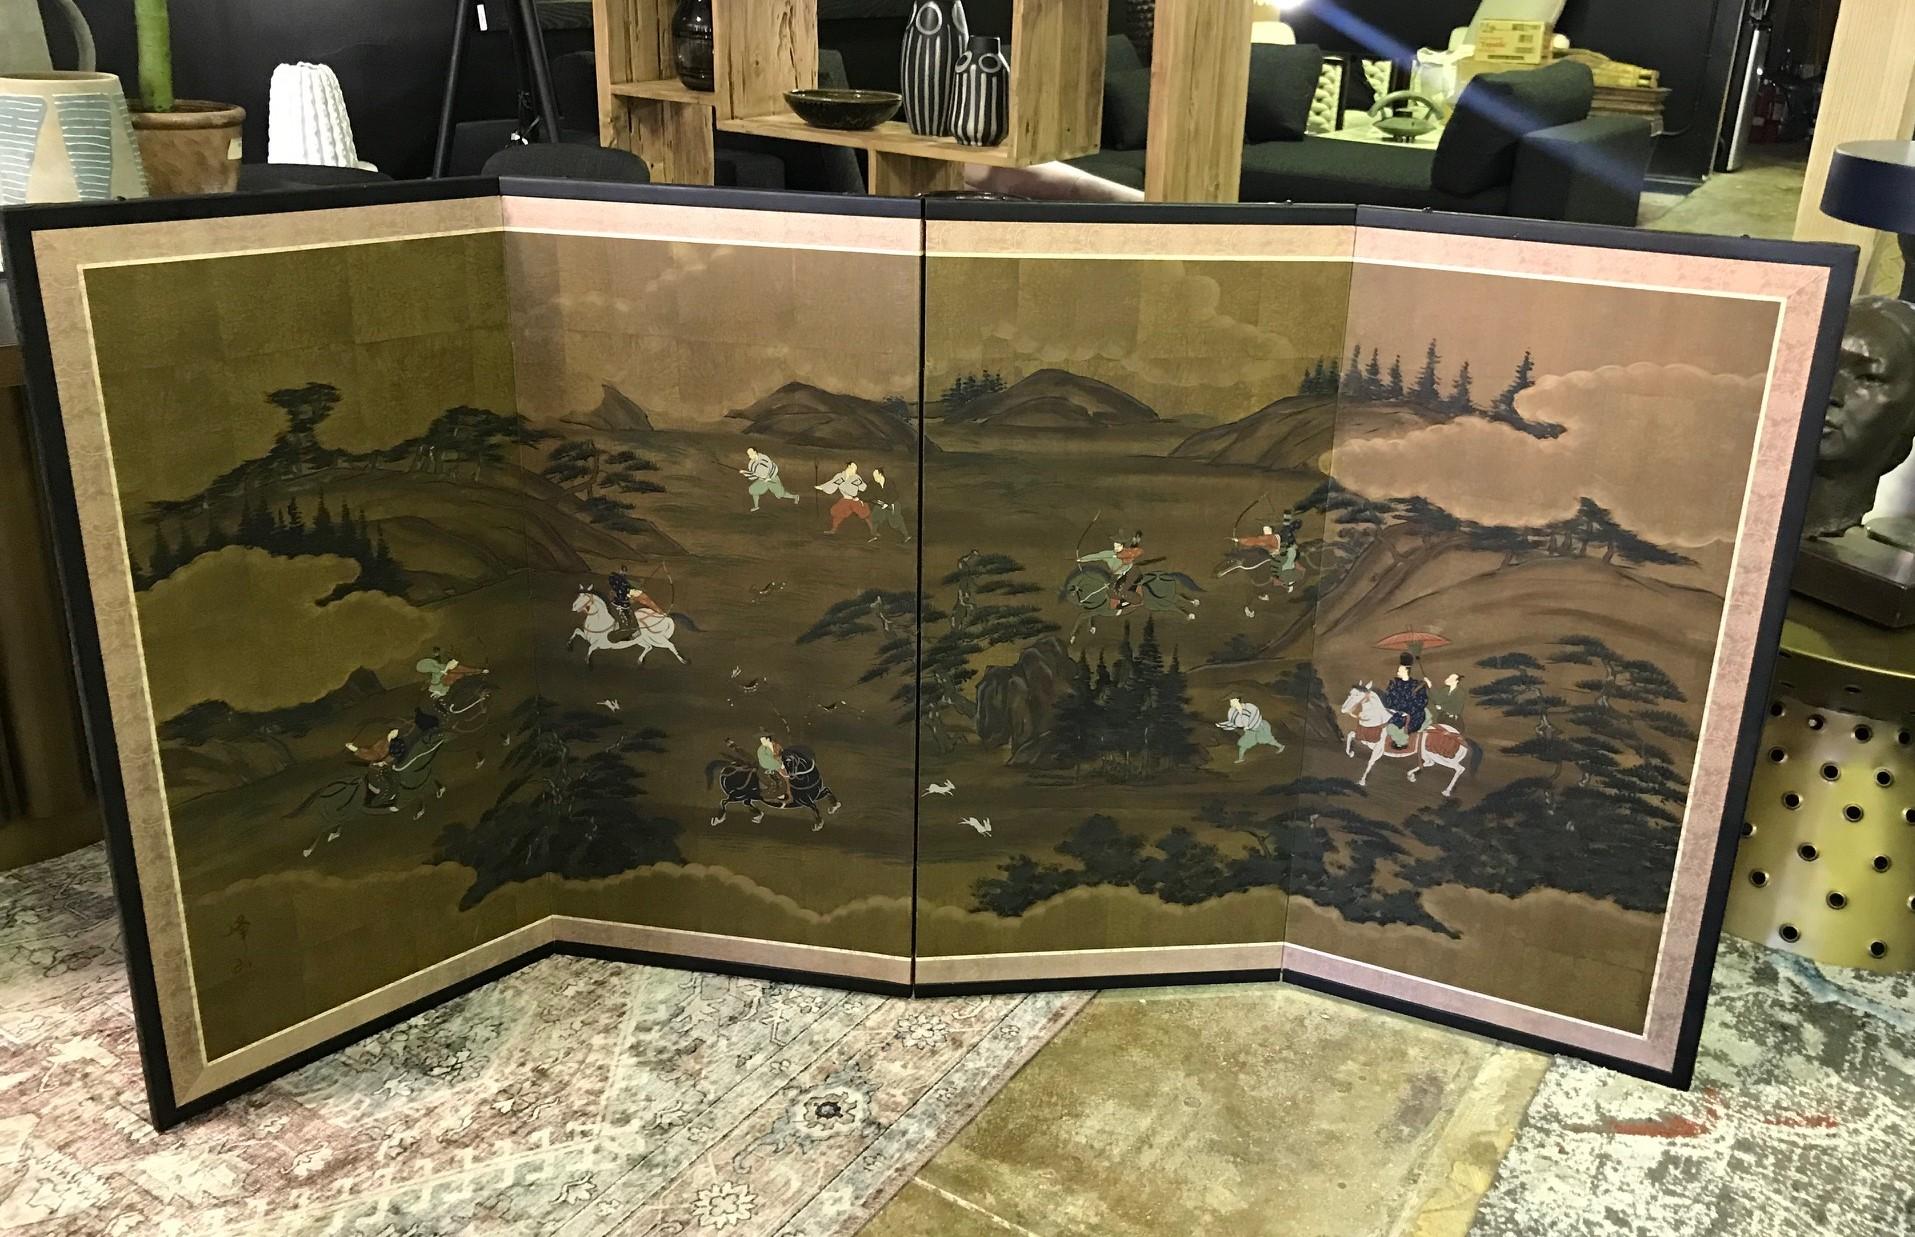 A gorgeous four-panel Japanese Byobu folding screen depicting a hunting scene with various warriors and animals spread across a vast mountainous landscape. The dark rich colors, deep gold leaf, and beautiful hand painted detail really make this an